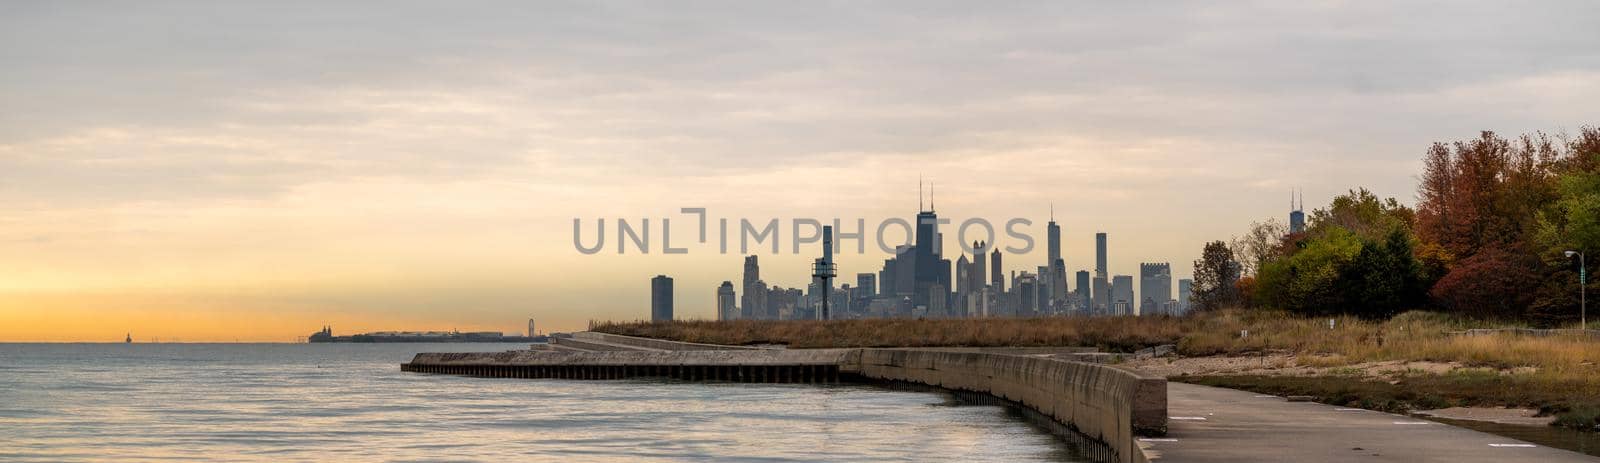 A panorama of the Chicago Skyline at sunrise with orange clouds in the sky and water below in autumn with colorful tree foliage.